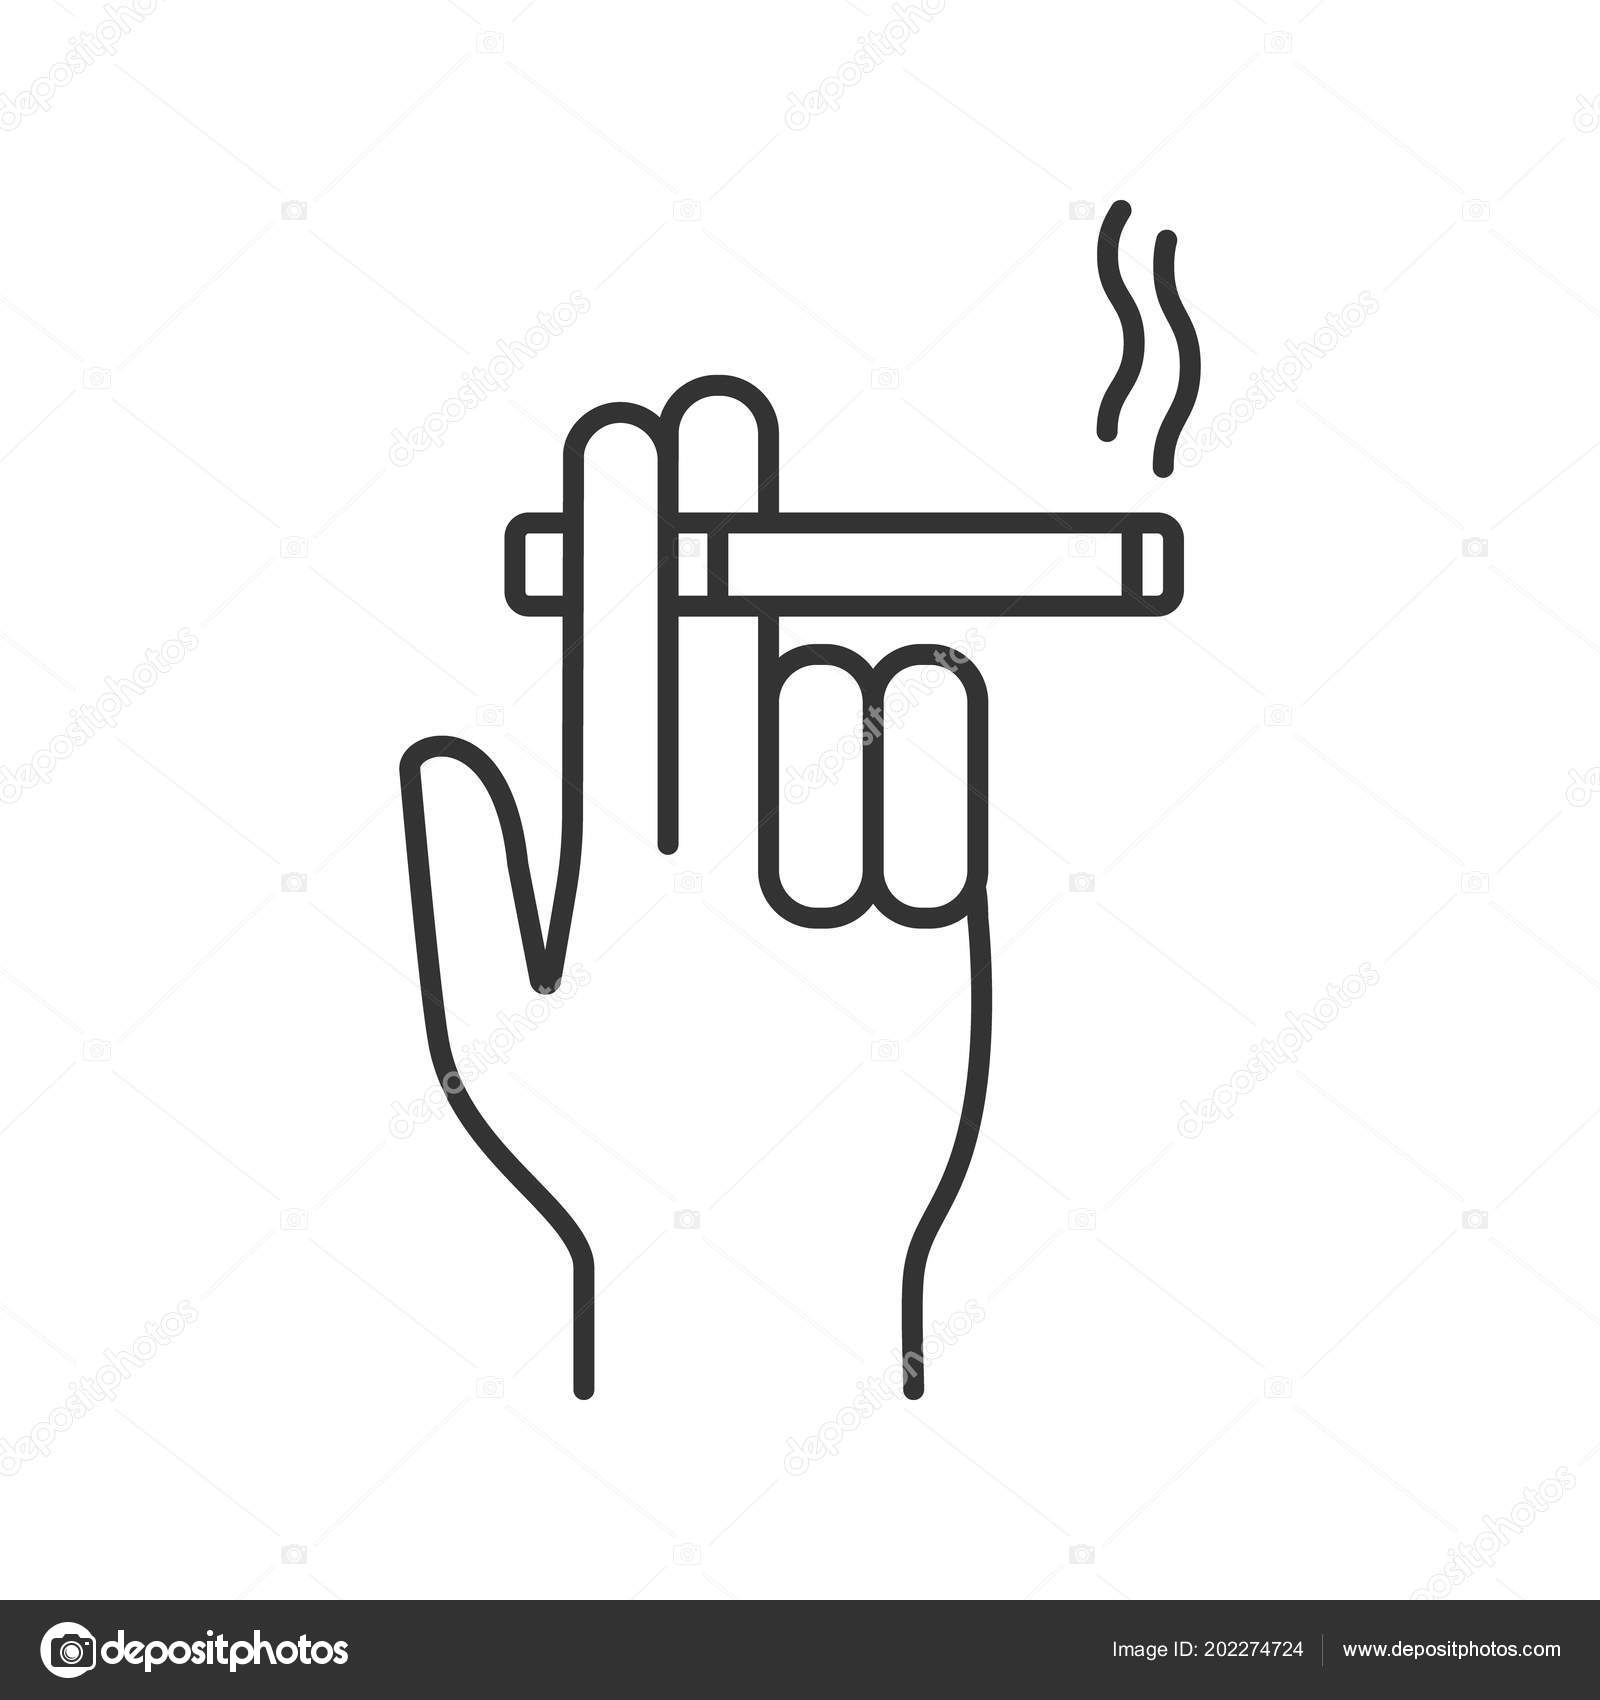 Hand Holding Burning Cigarette Linear Icon Thin Line Illustration Smoker Stock Vector C Bsd 202274724 Useful drawing references and sketches for beginner artists. https depositphotos com 202274724 stock illustration hand holding burning cigarette linear html